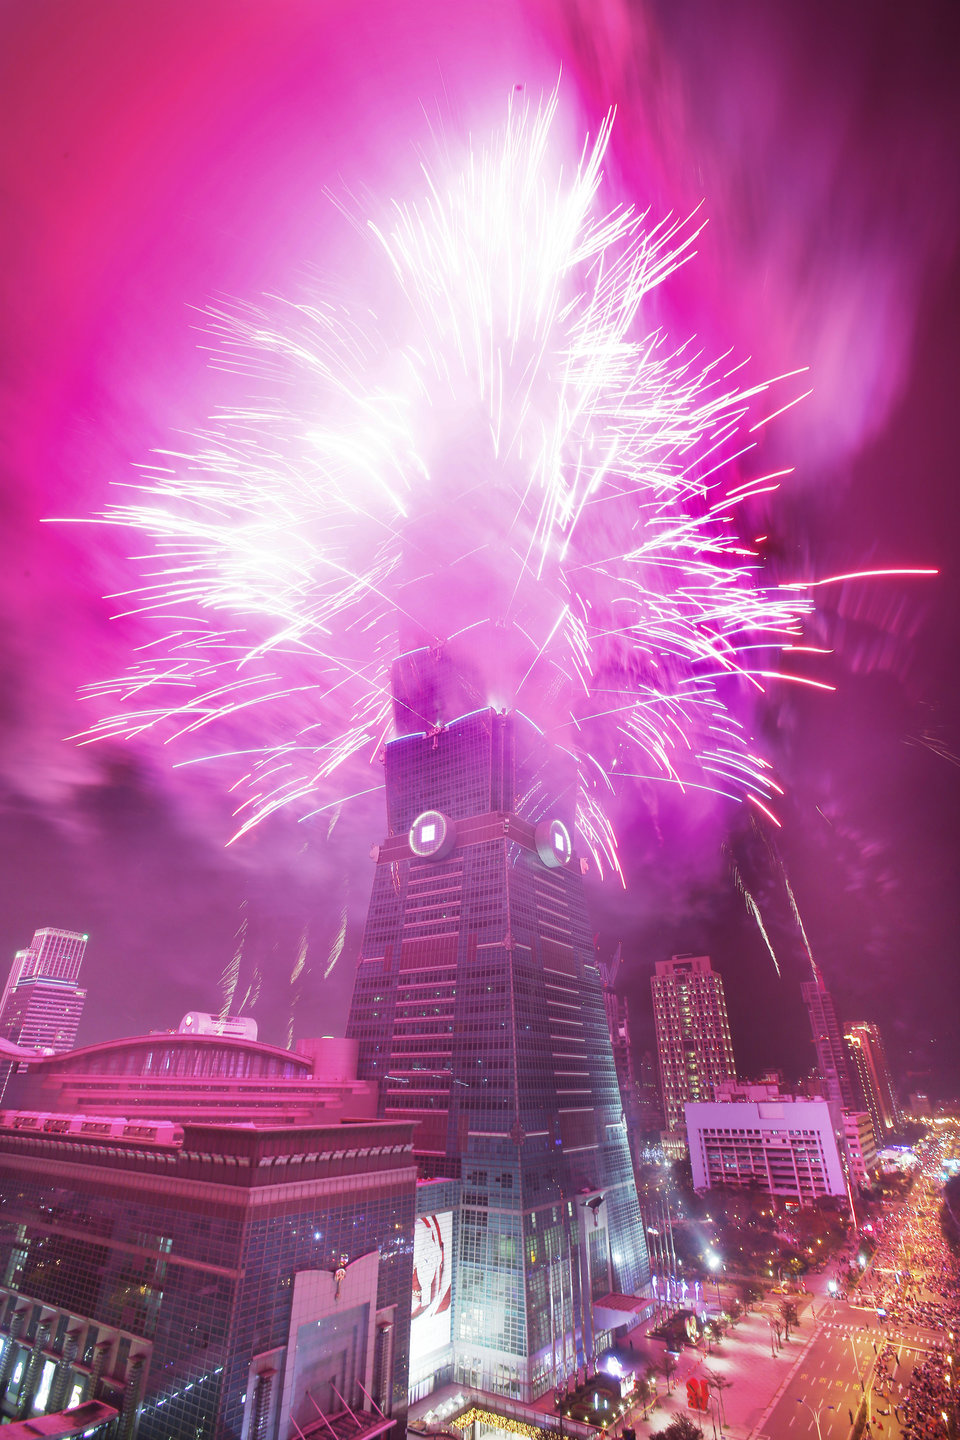 A fireworks display is set off from the Taipei 101 skyscraper during the New Year's Eve celebrations in Taipei, Taiwan, Friday, Jan. 1, 2016. (AP Photo/Wally Santana)